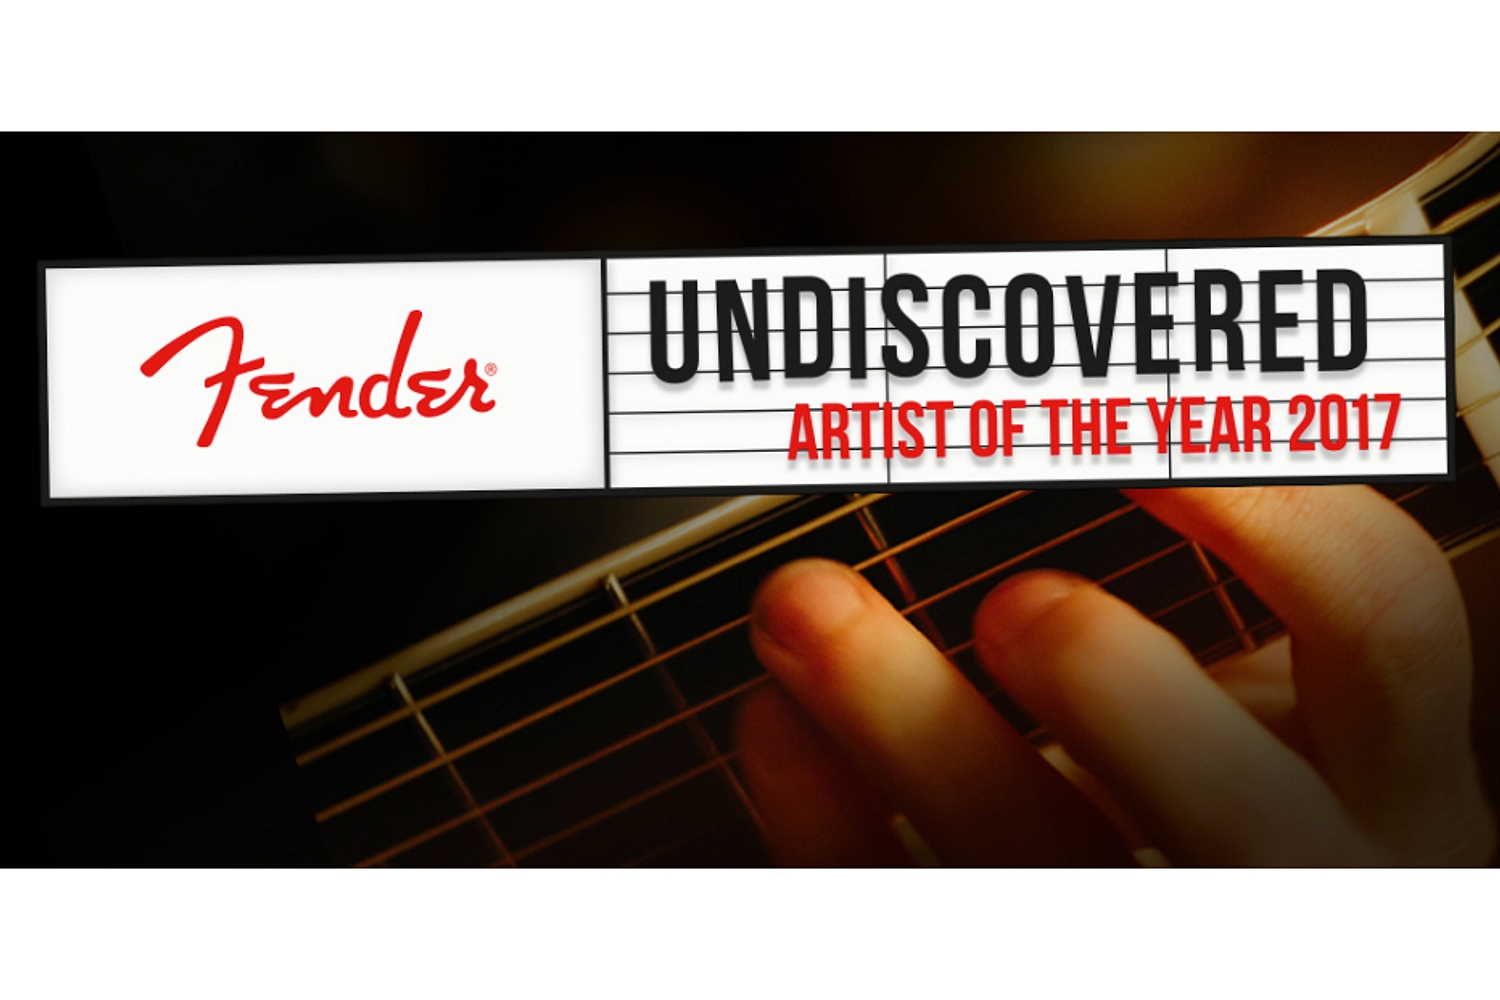 Vote for Fender’s Undiscovered Artist of the Year for 2017